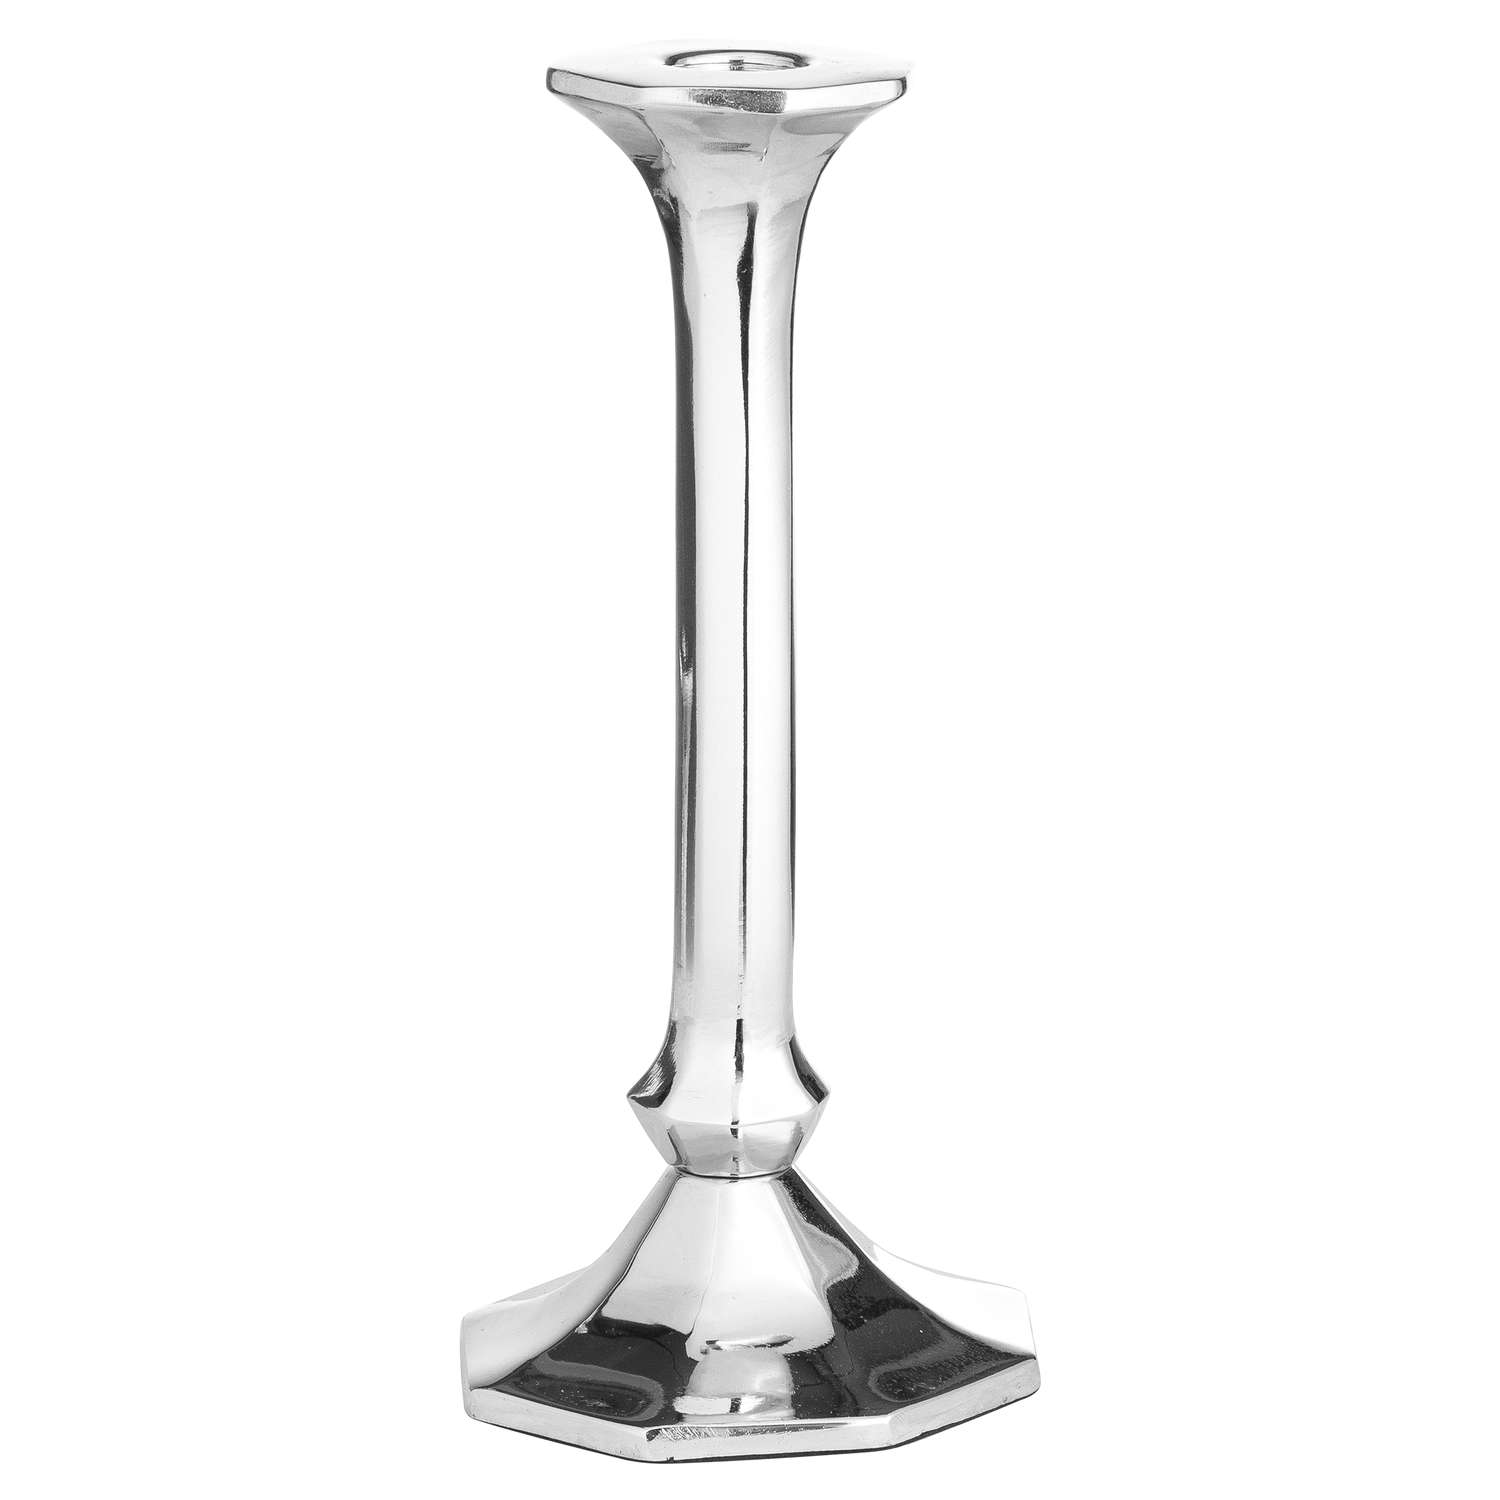 Silver Octagonal Candle Holder - Image 1